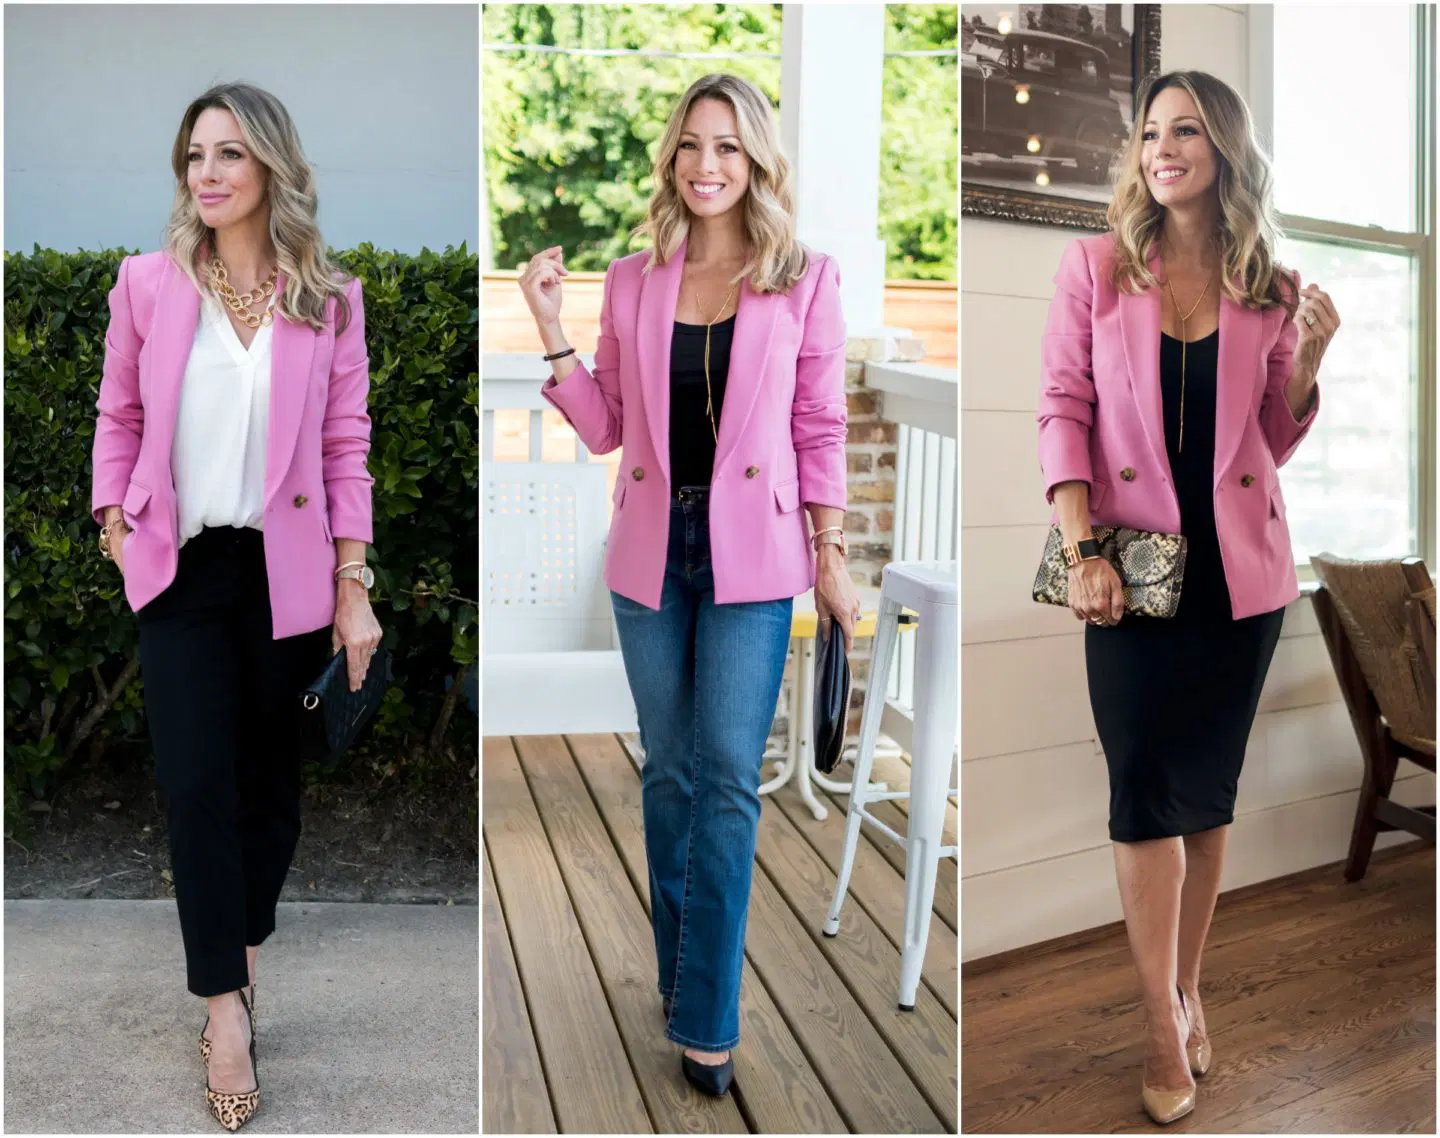 Blazer with Leggings Outfits (54 ideas & outfits)